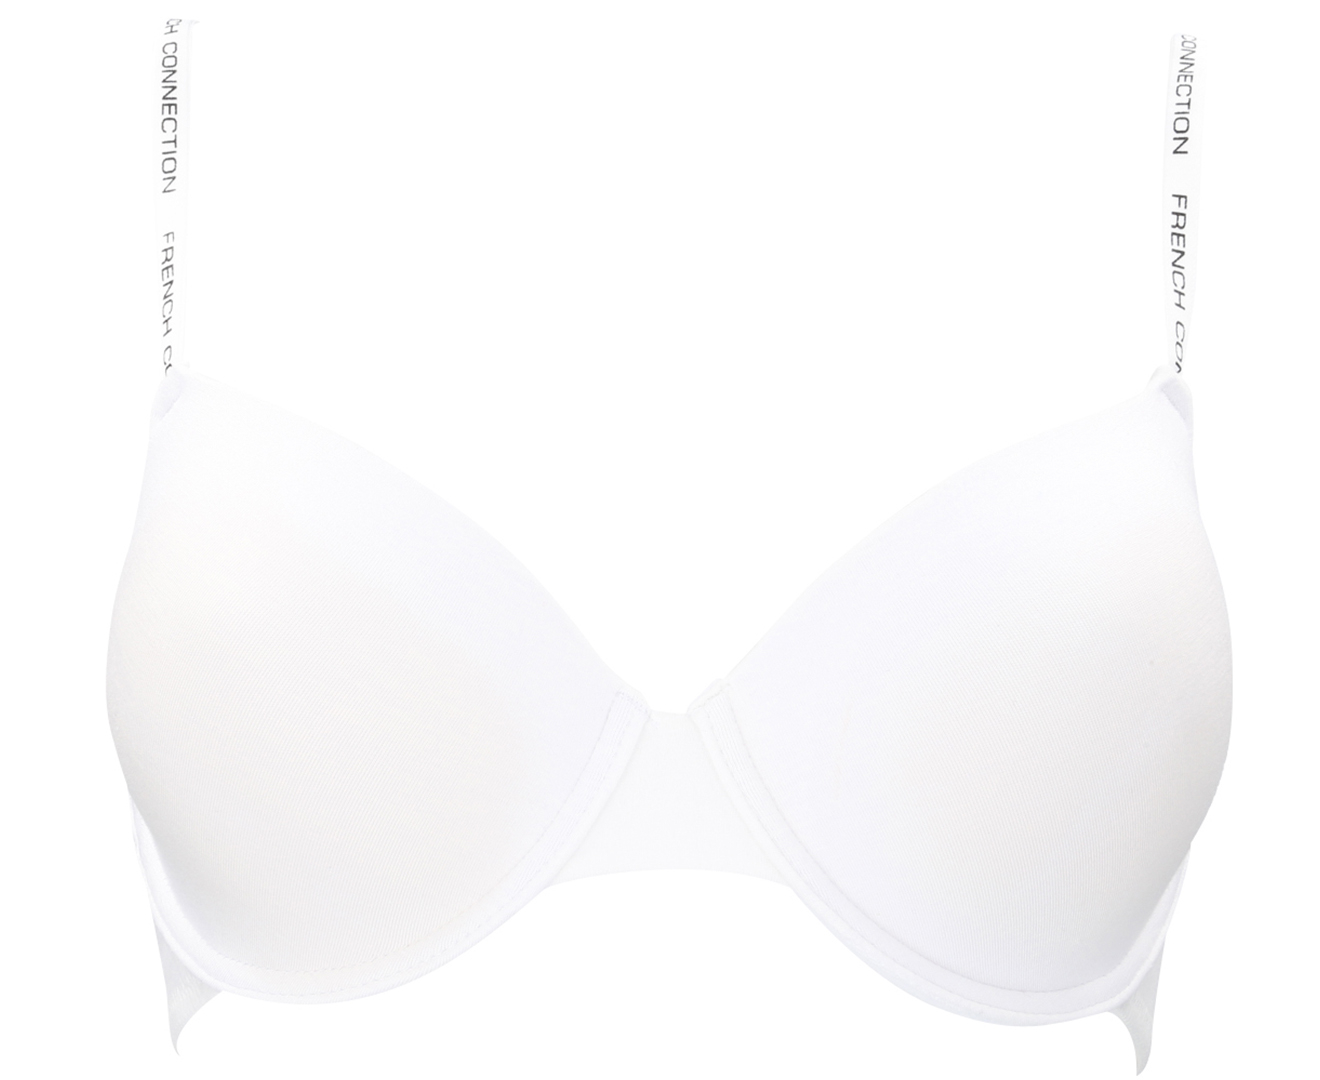 French Connection Women's T-Shirt Bra 2-Pack - Blue/White